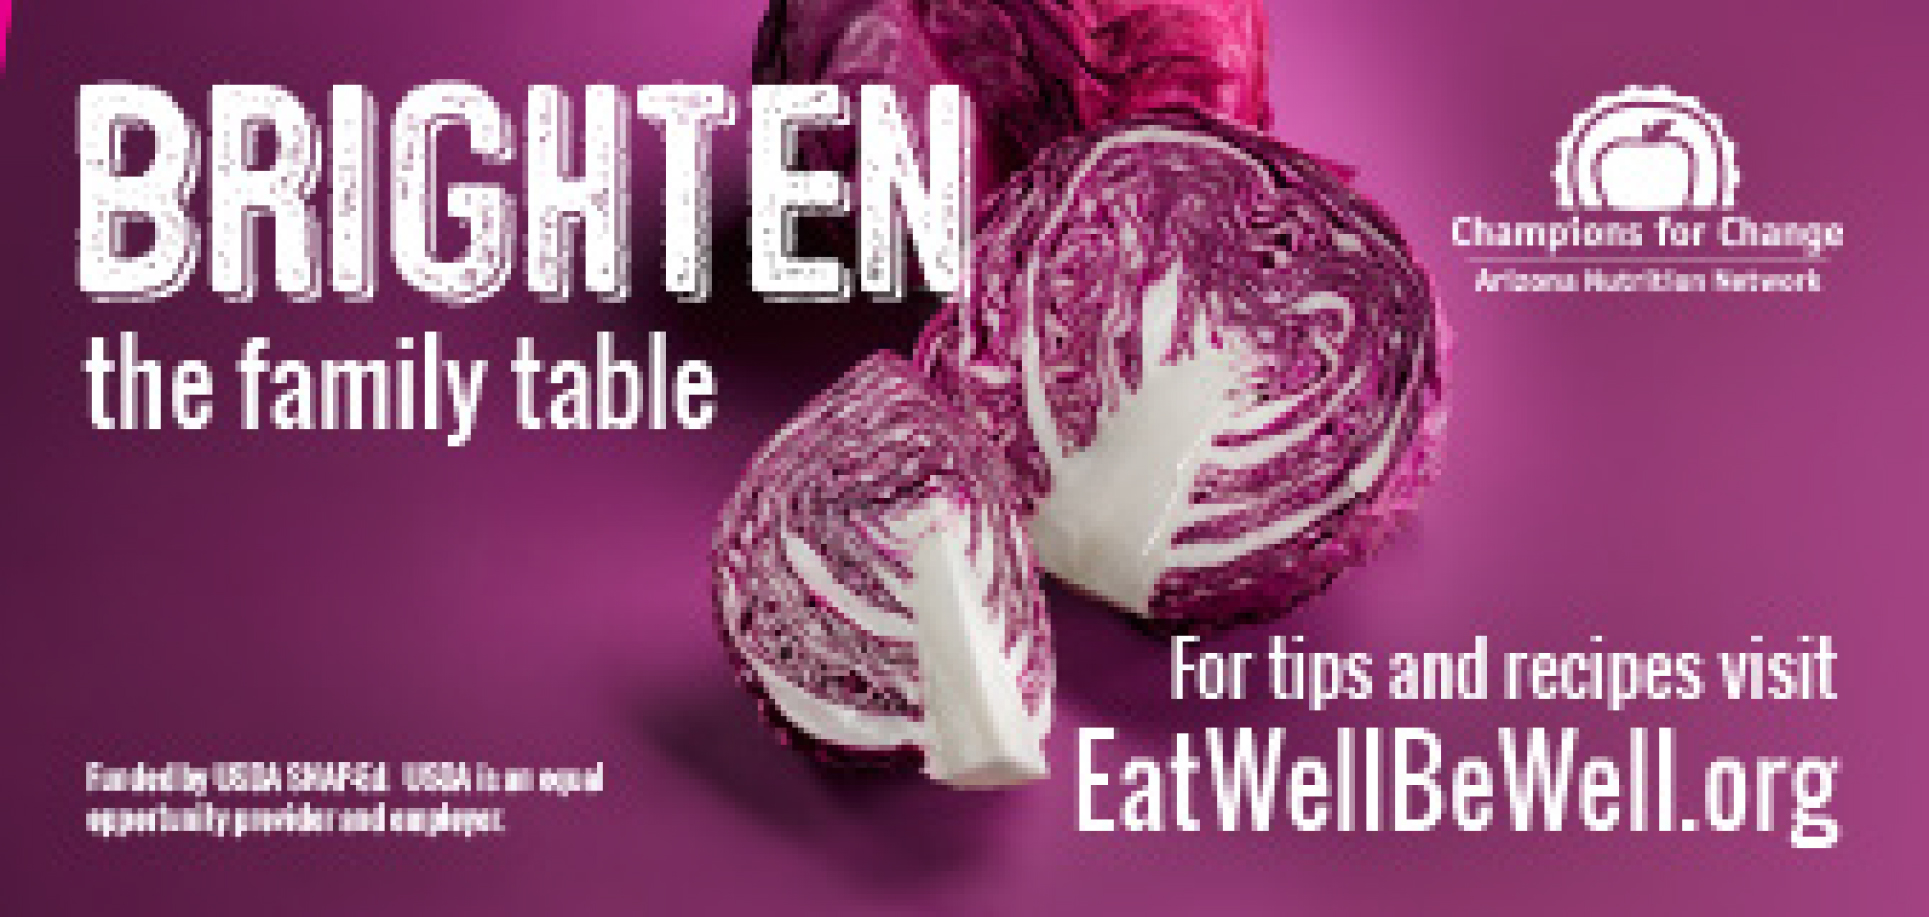 Brighten the Family Table - red cabbage